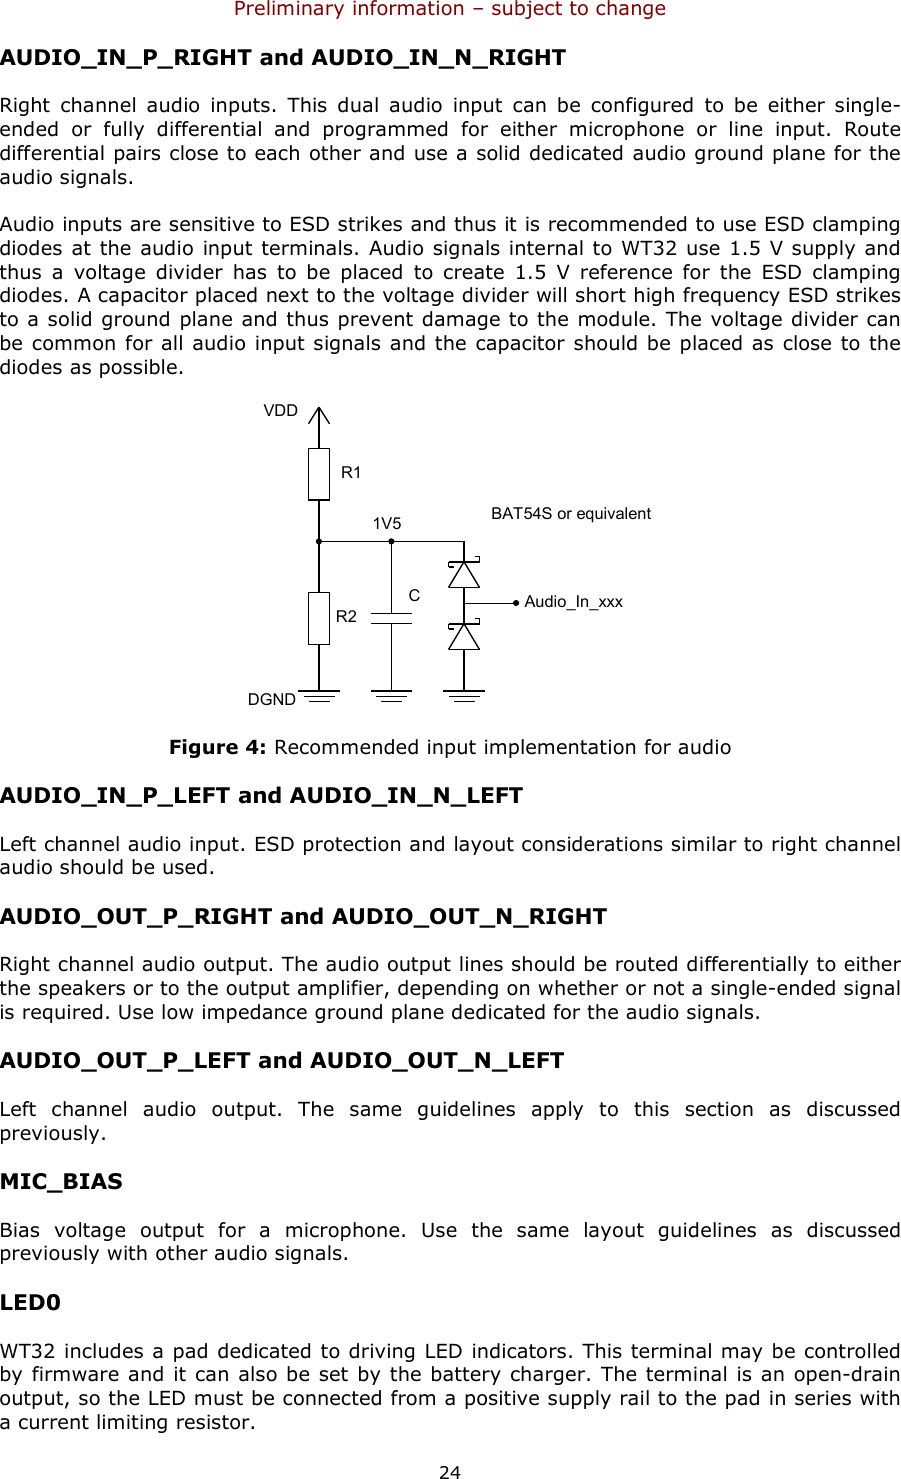 Preliminary information – subject to change  24 AUDIO_IN_P_RIGHT and AUDIO_IN_N_RIGHT Right  channel  audio  inputs.  This  dual  audio  input  can  be  configured  to  be  either  single-ended  or  fully  differential  and  programmed  for  either  microphone  or  line  input.  Route differential pairs close to each other and use a solid dedicated audio ground plane for the audio signals.  Audio inputs are sensitive to ESD strikes and thus it is recommended to use ESD clamping diodes at the audio  input terminals. Audio signals internal to WT32 use 1.5 V supply and thus  a  voltage  divider  has  to  be  placed  to  create  1.5  V  reference  for  the  ESD  clamping diodes. A capacitor placed next to the voltage divider will short high frequency ESD strikes to a solid ground plane and thus prevent damage to the module. The voltage divider can be common for all audio input signals and the capacitor should be placed as close to the diodes as possible.  Audio_In_xxxR1R2CBAT54S or equivalentVDDDGND1V5 Figure 4: Recommended input implementation for audio AUDIO_IN_P_LEFT and AUDIO_IN_N_LEFT Left channel audio input. ESD protection and layout considerations similar to right channel audio should be used. AUDIO_OUT_P_RIGHT and AUDIO_OUT_N_RIGHT Right channel audio output. The audio output lines should be routed differentially to either the speakers or to the output amplifier, depending on whether or not a single-ended signal is required. Use low impedance ground plane dedicated for the audio signals. AUDIO_OUT_P_LEFT and AUDIO_OUT_N_LEFT Left  channel  audio  output.  The  same  guidelines  apply  to  this  section  as  discussed previously. MIC_BIAS Bias  voltage  output  for  a  microphone.  Use  the  same  layout  guidelines  as  discussed previously with other audio signals.  LED0 WT32 includes a pad dedicated to driving LED indicators. This terminal may be controlled by firmware and it can also be set by the battery charger. The terminal is an open-drain output, so the LED must be connected from a positive supply rail to the pad in series with a current limiting resistor. 